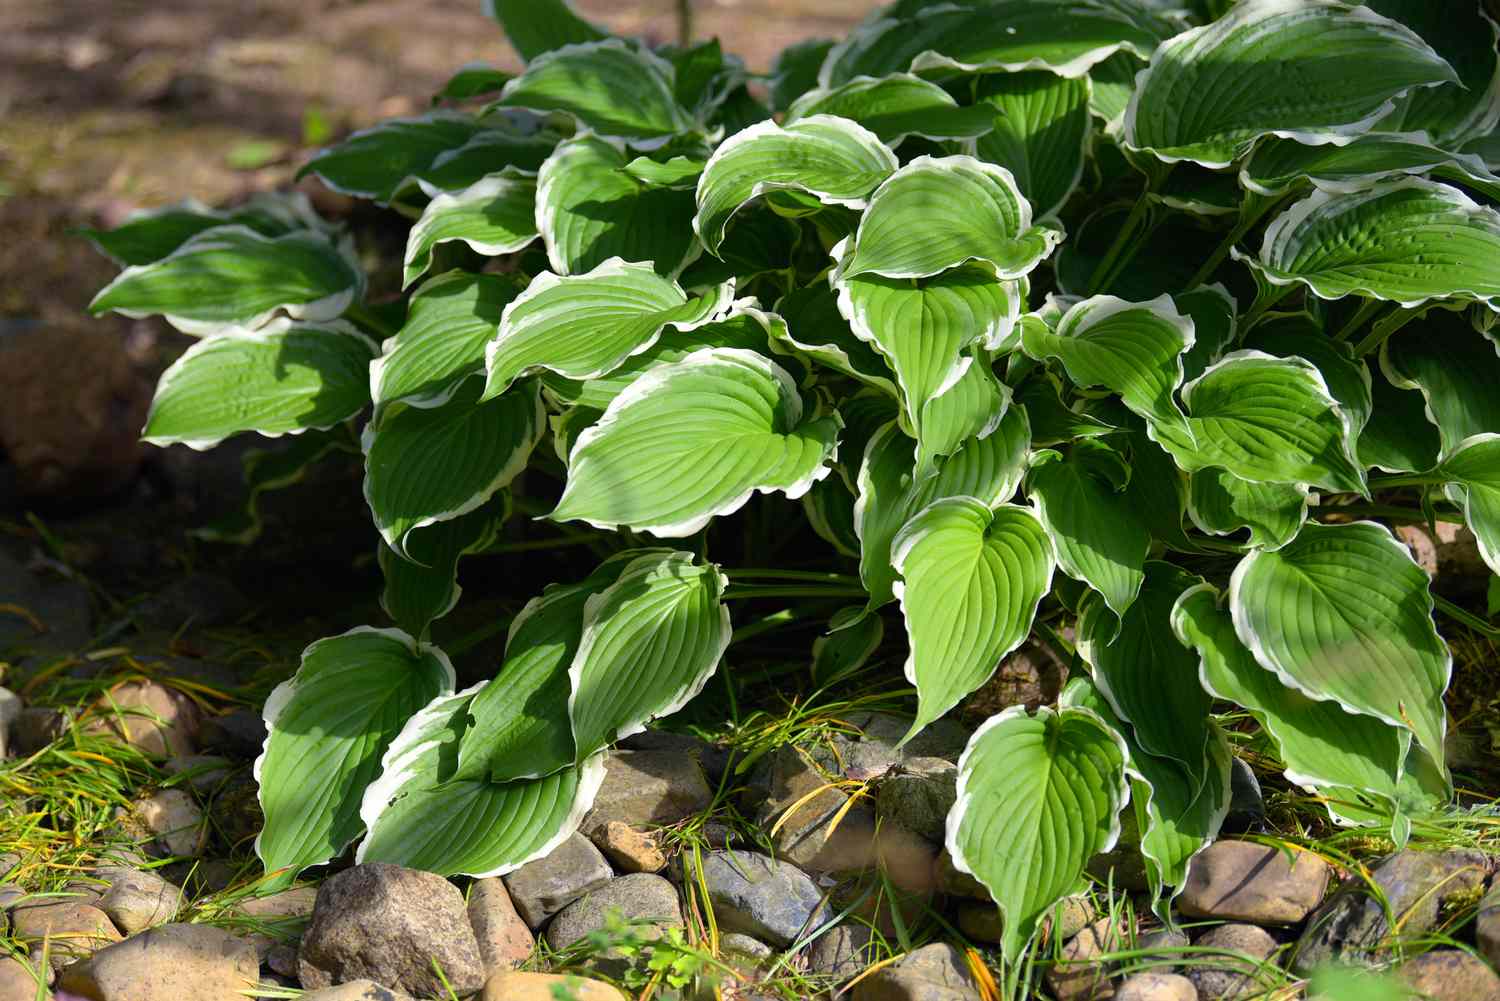 Hosta plant with variegated white and green leaves near rocks